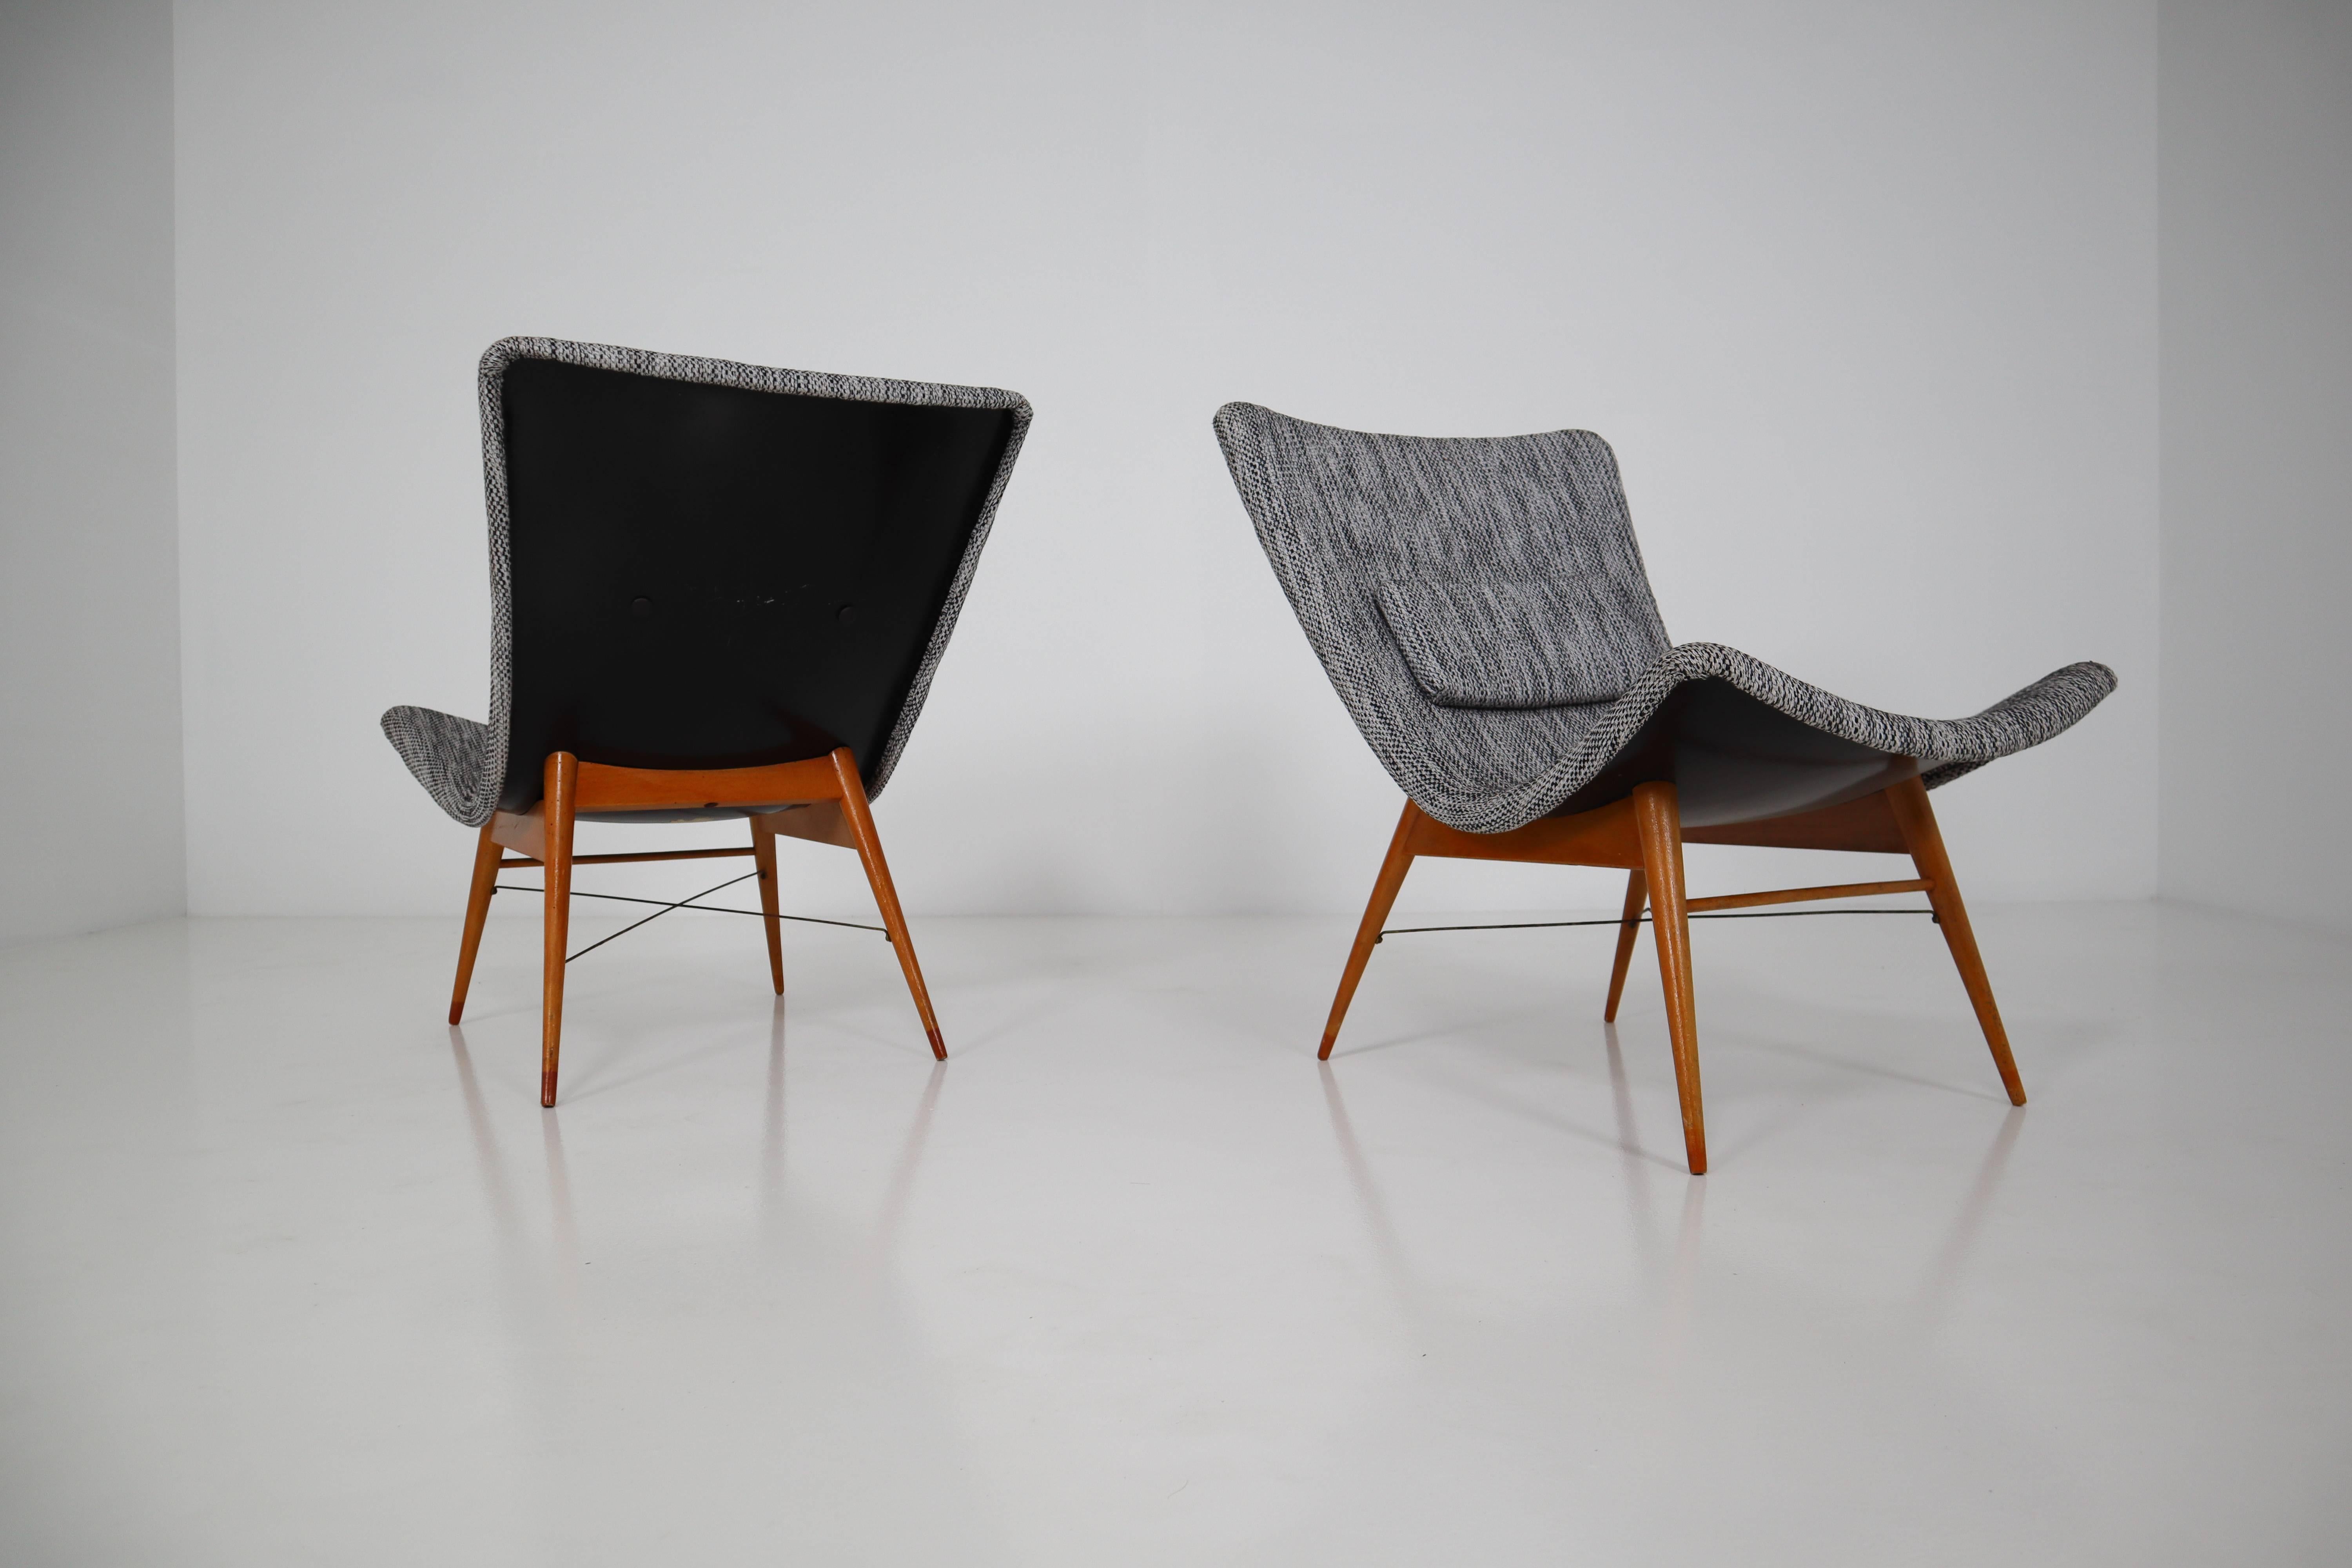 Lounge chairs by Miroslav Navratil, manufactured in former Czechoslovakia by Cesky Nabytek, 1959. Original wooden base, fiberglass shell seating. The backside of the chair is original black color and have a new Reupholstered fabric in grey color.